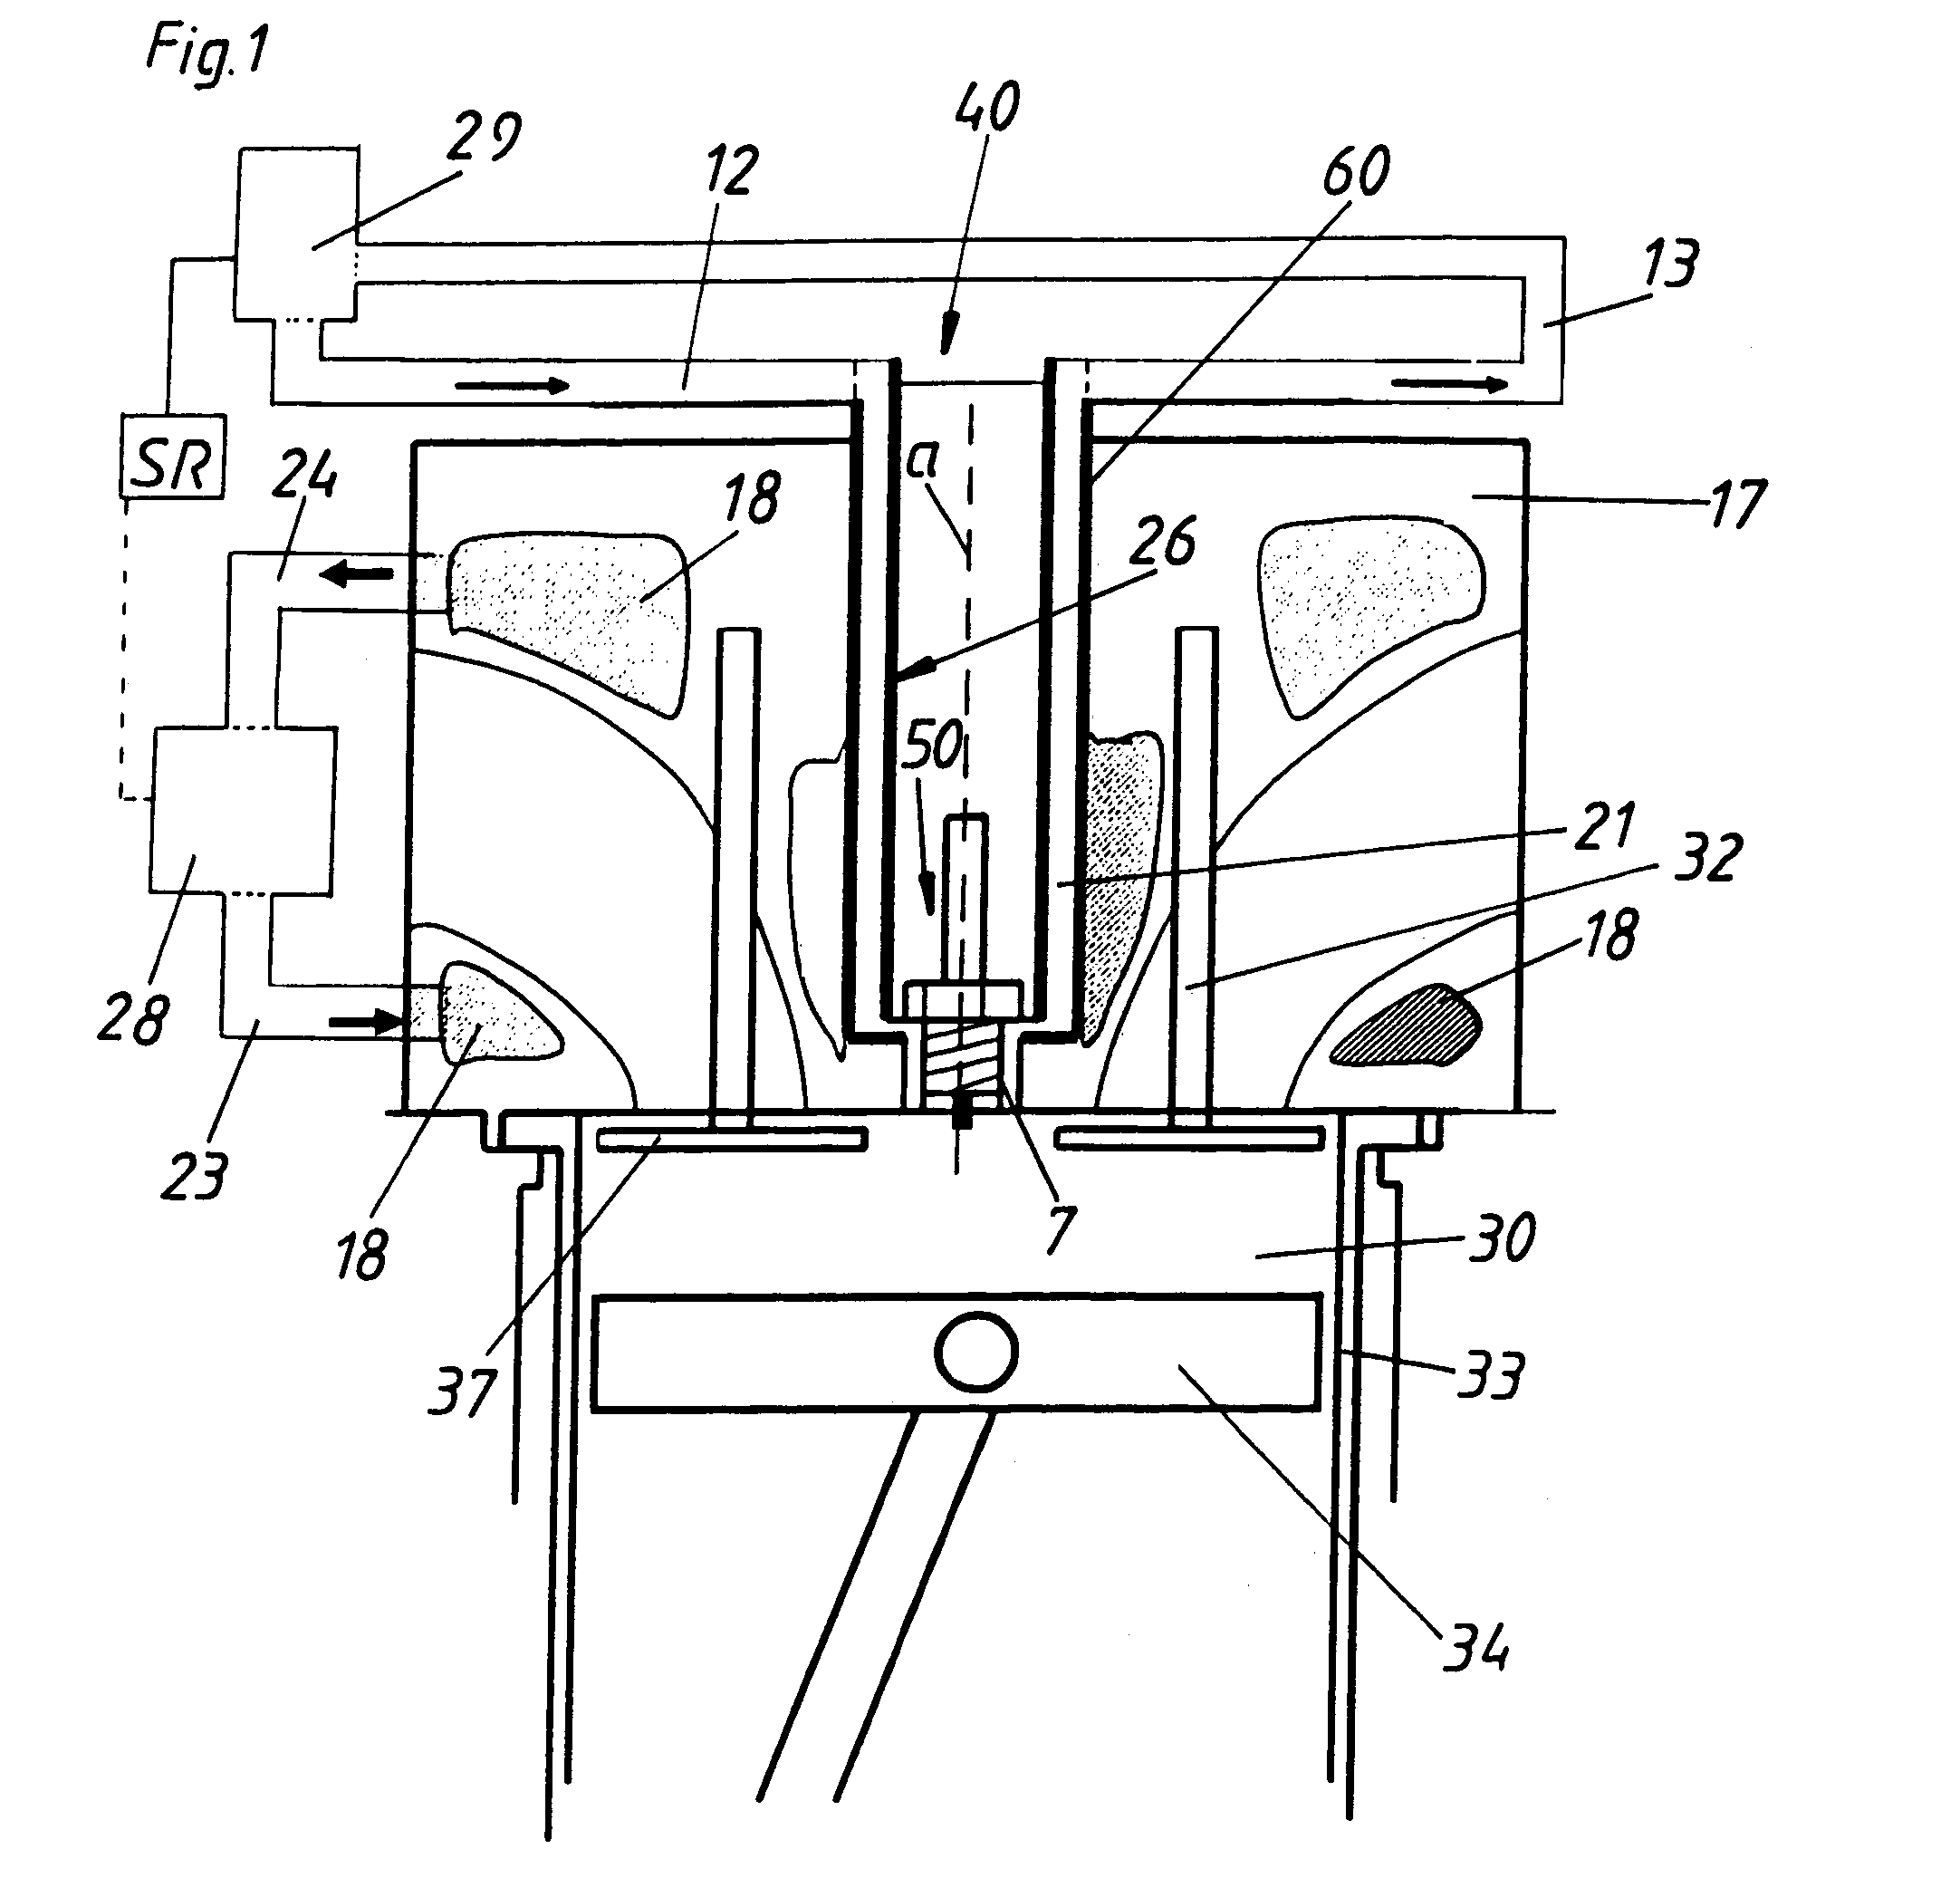 Internal combustion engine ignition device